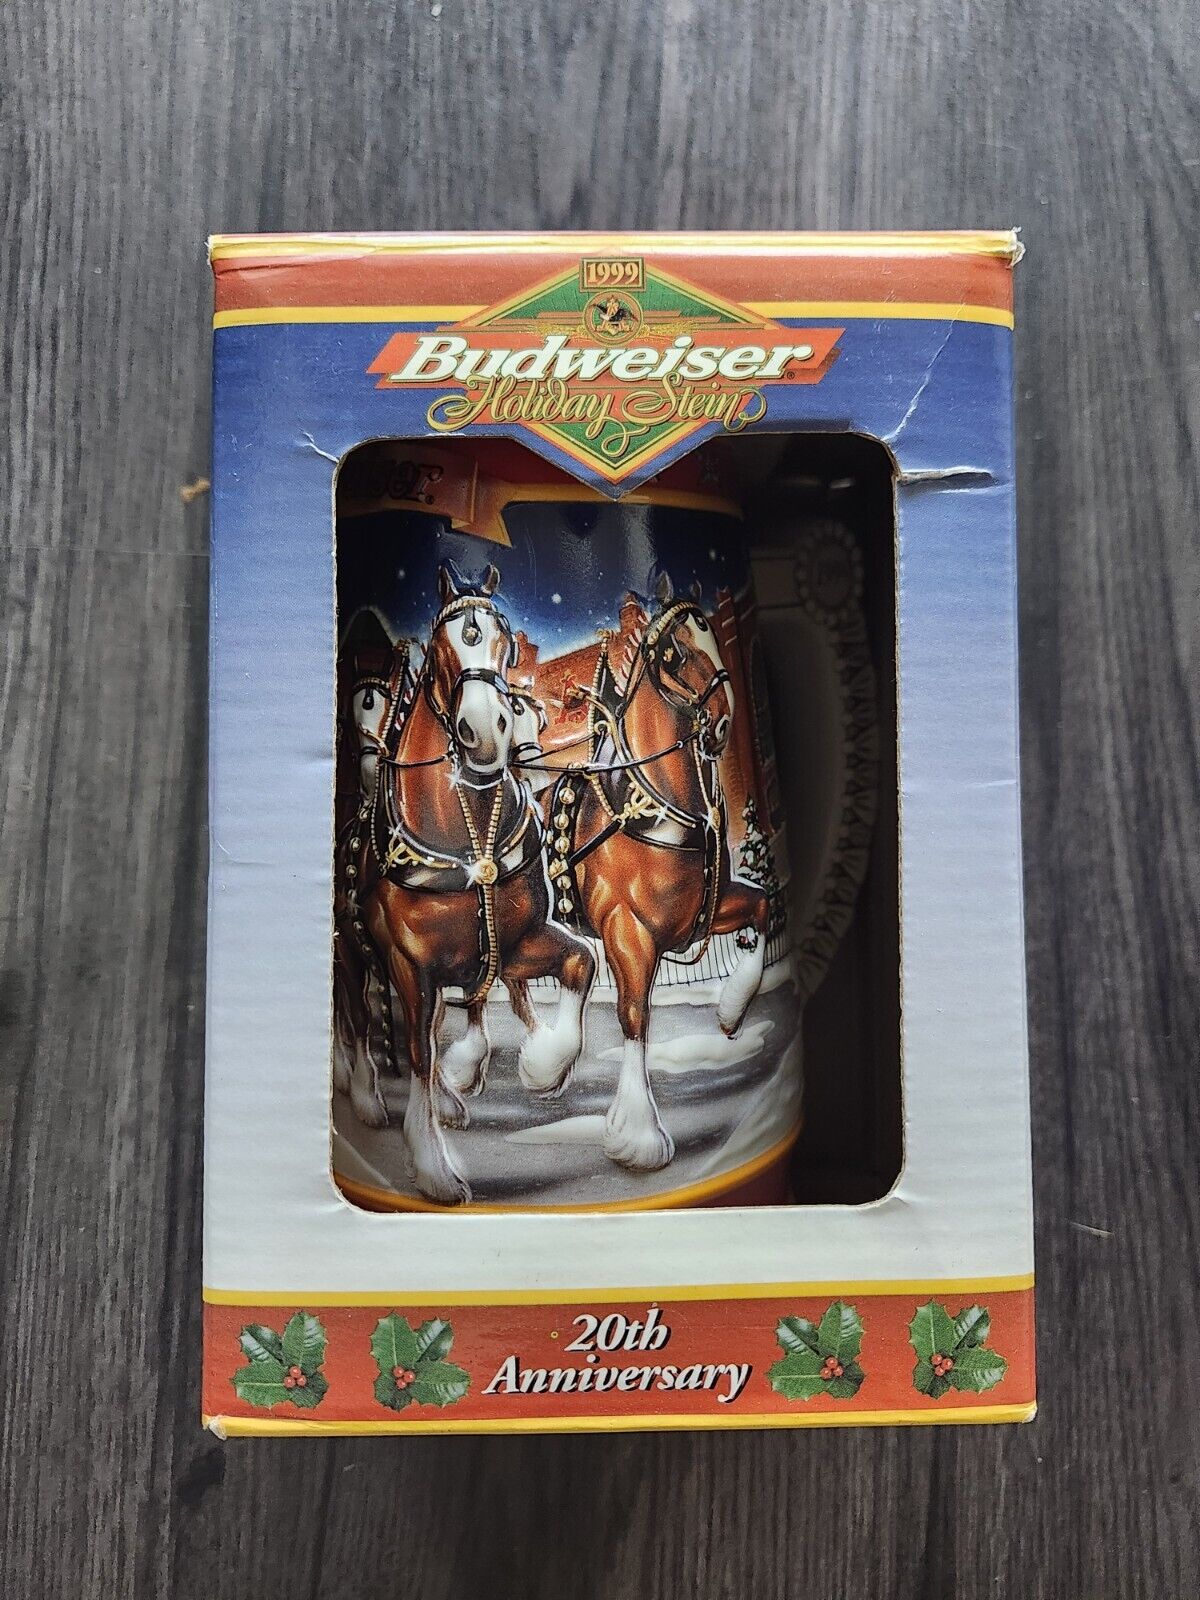 1999 Budweiser Holiday Beer Stein 20th Anniversary In Box